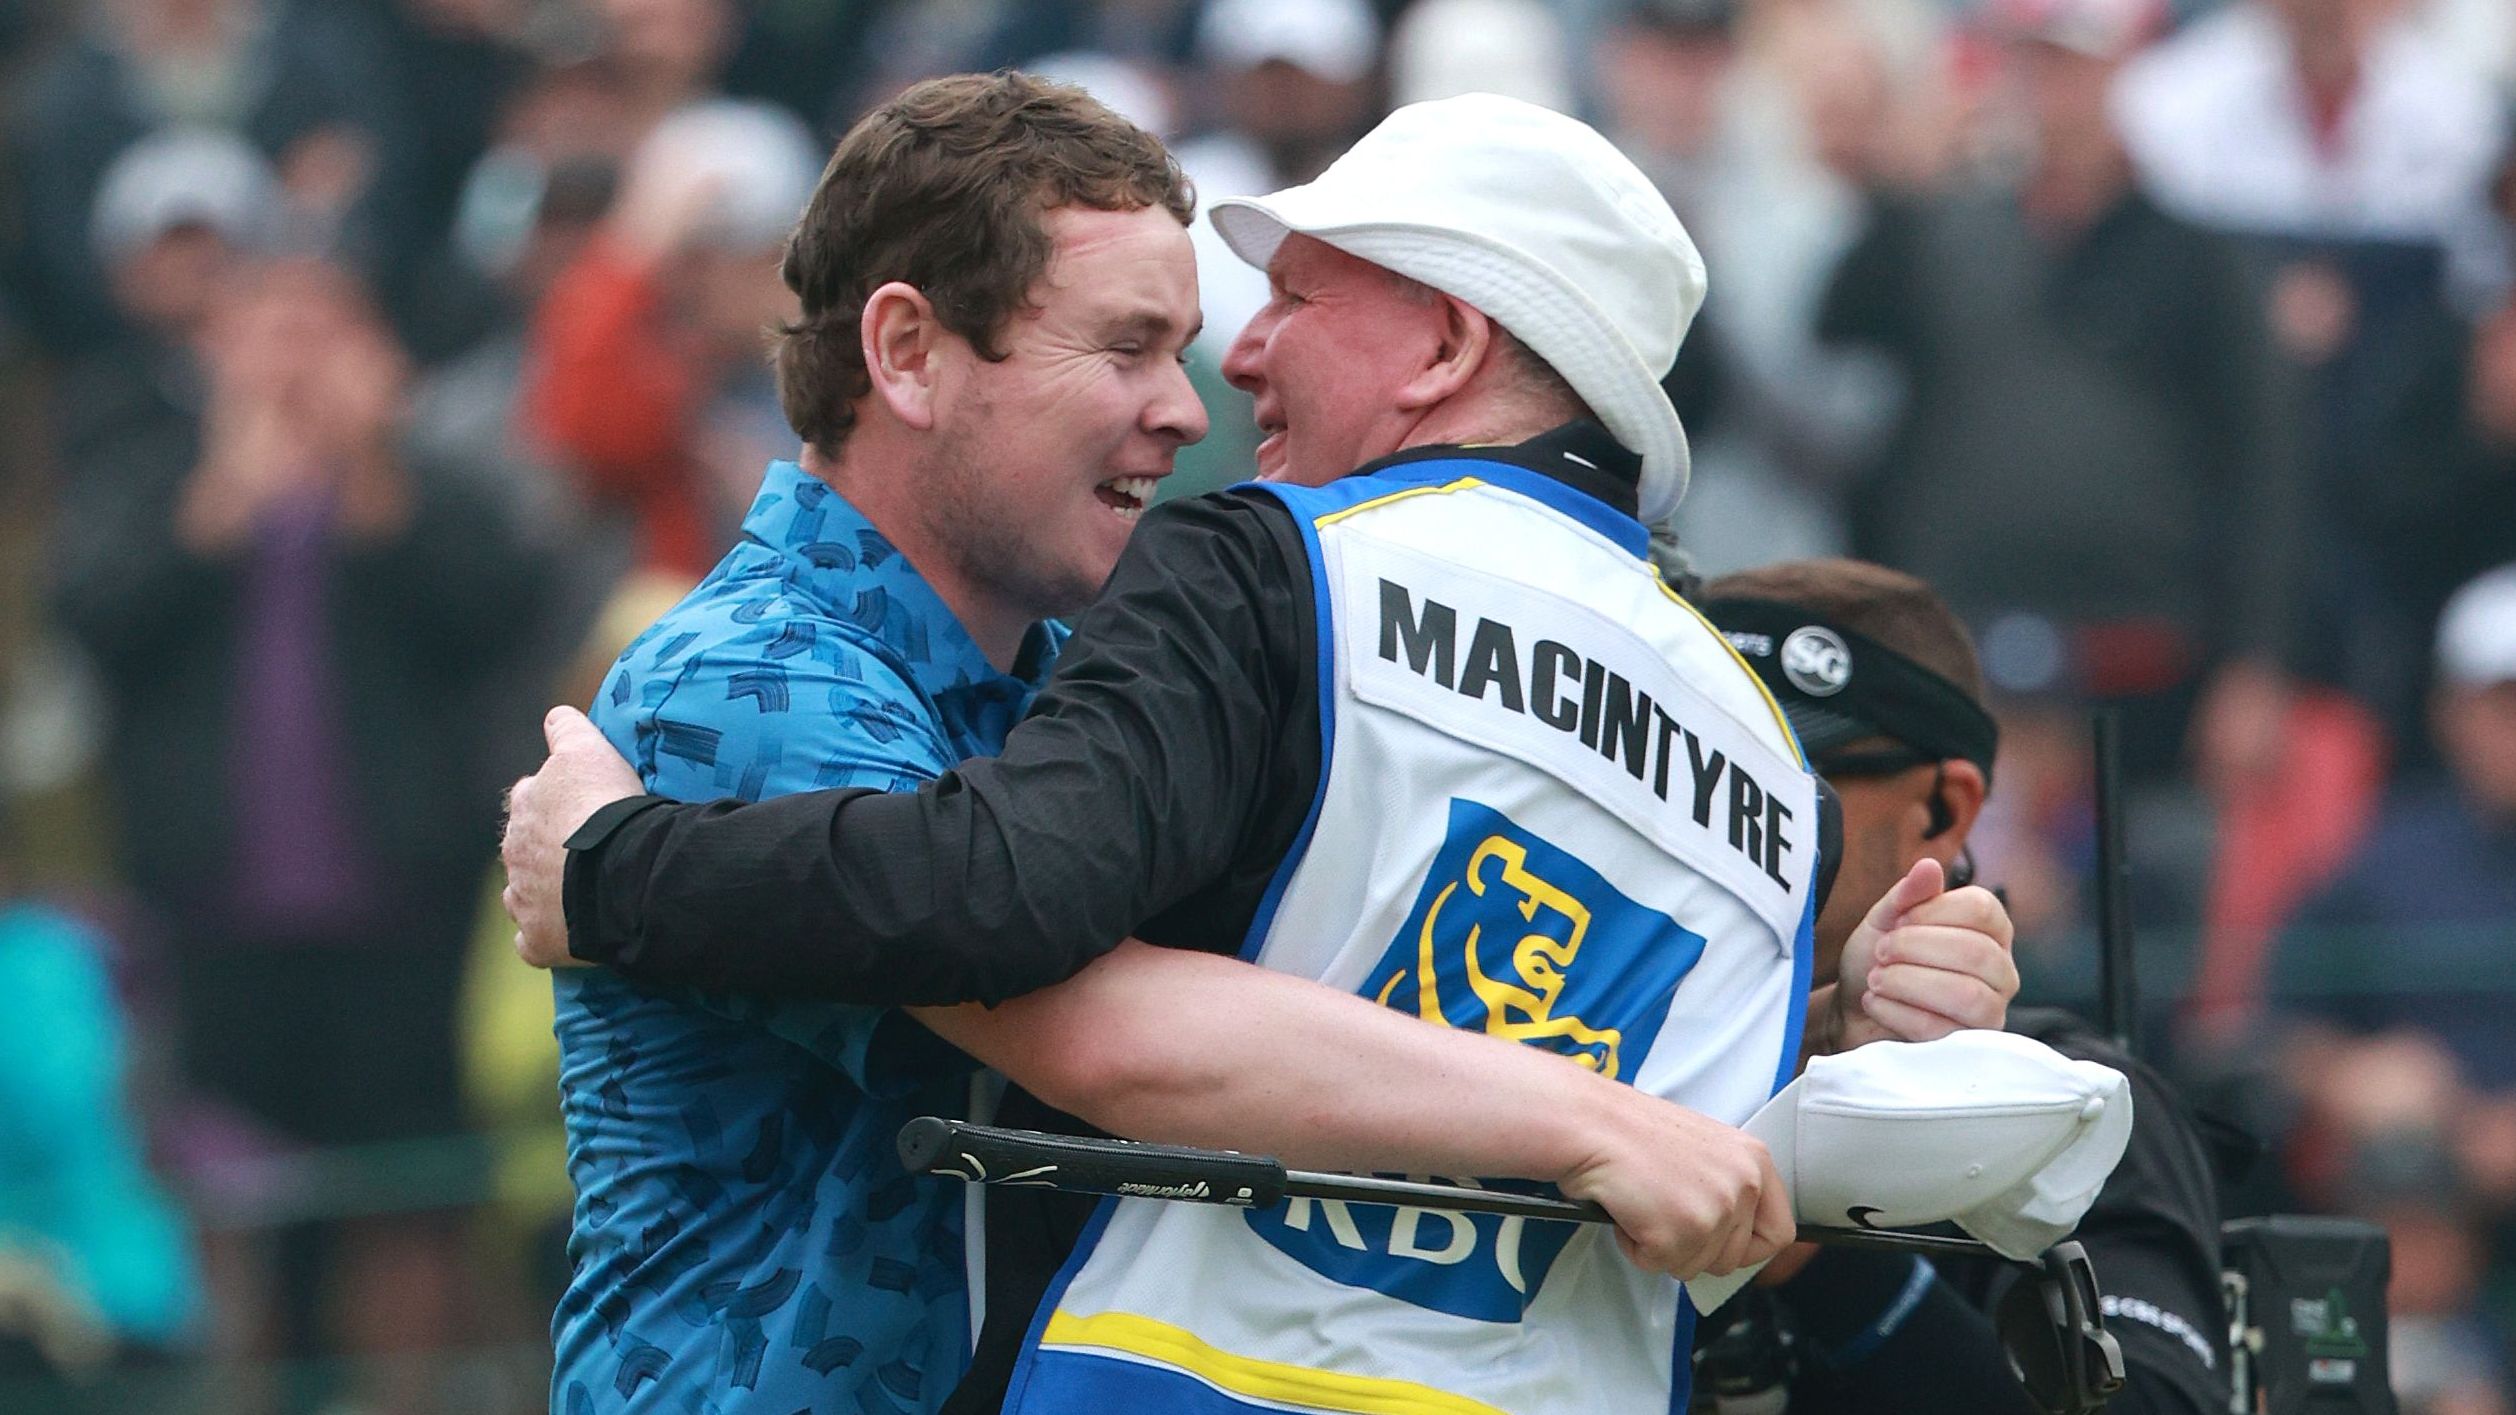 Robert MacIntyre won the Canadian Open on Sunday, with his father, Dougie, acting as his caddie